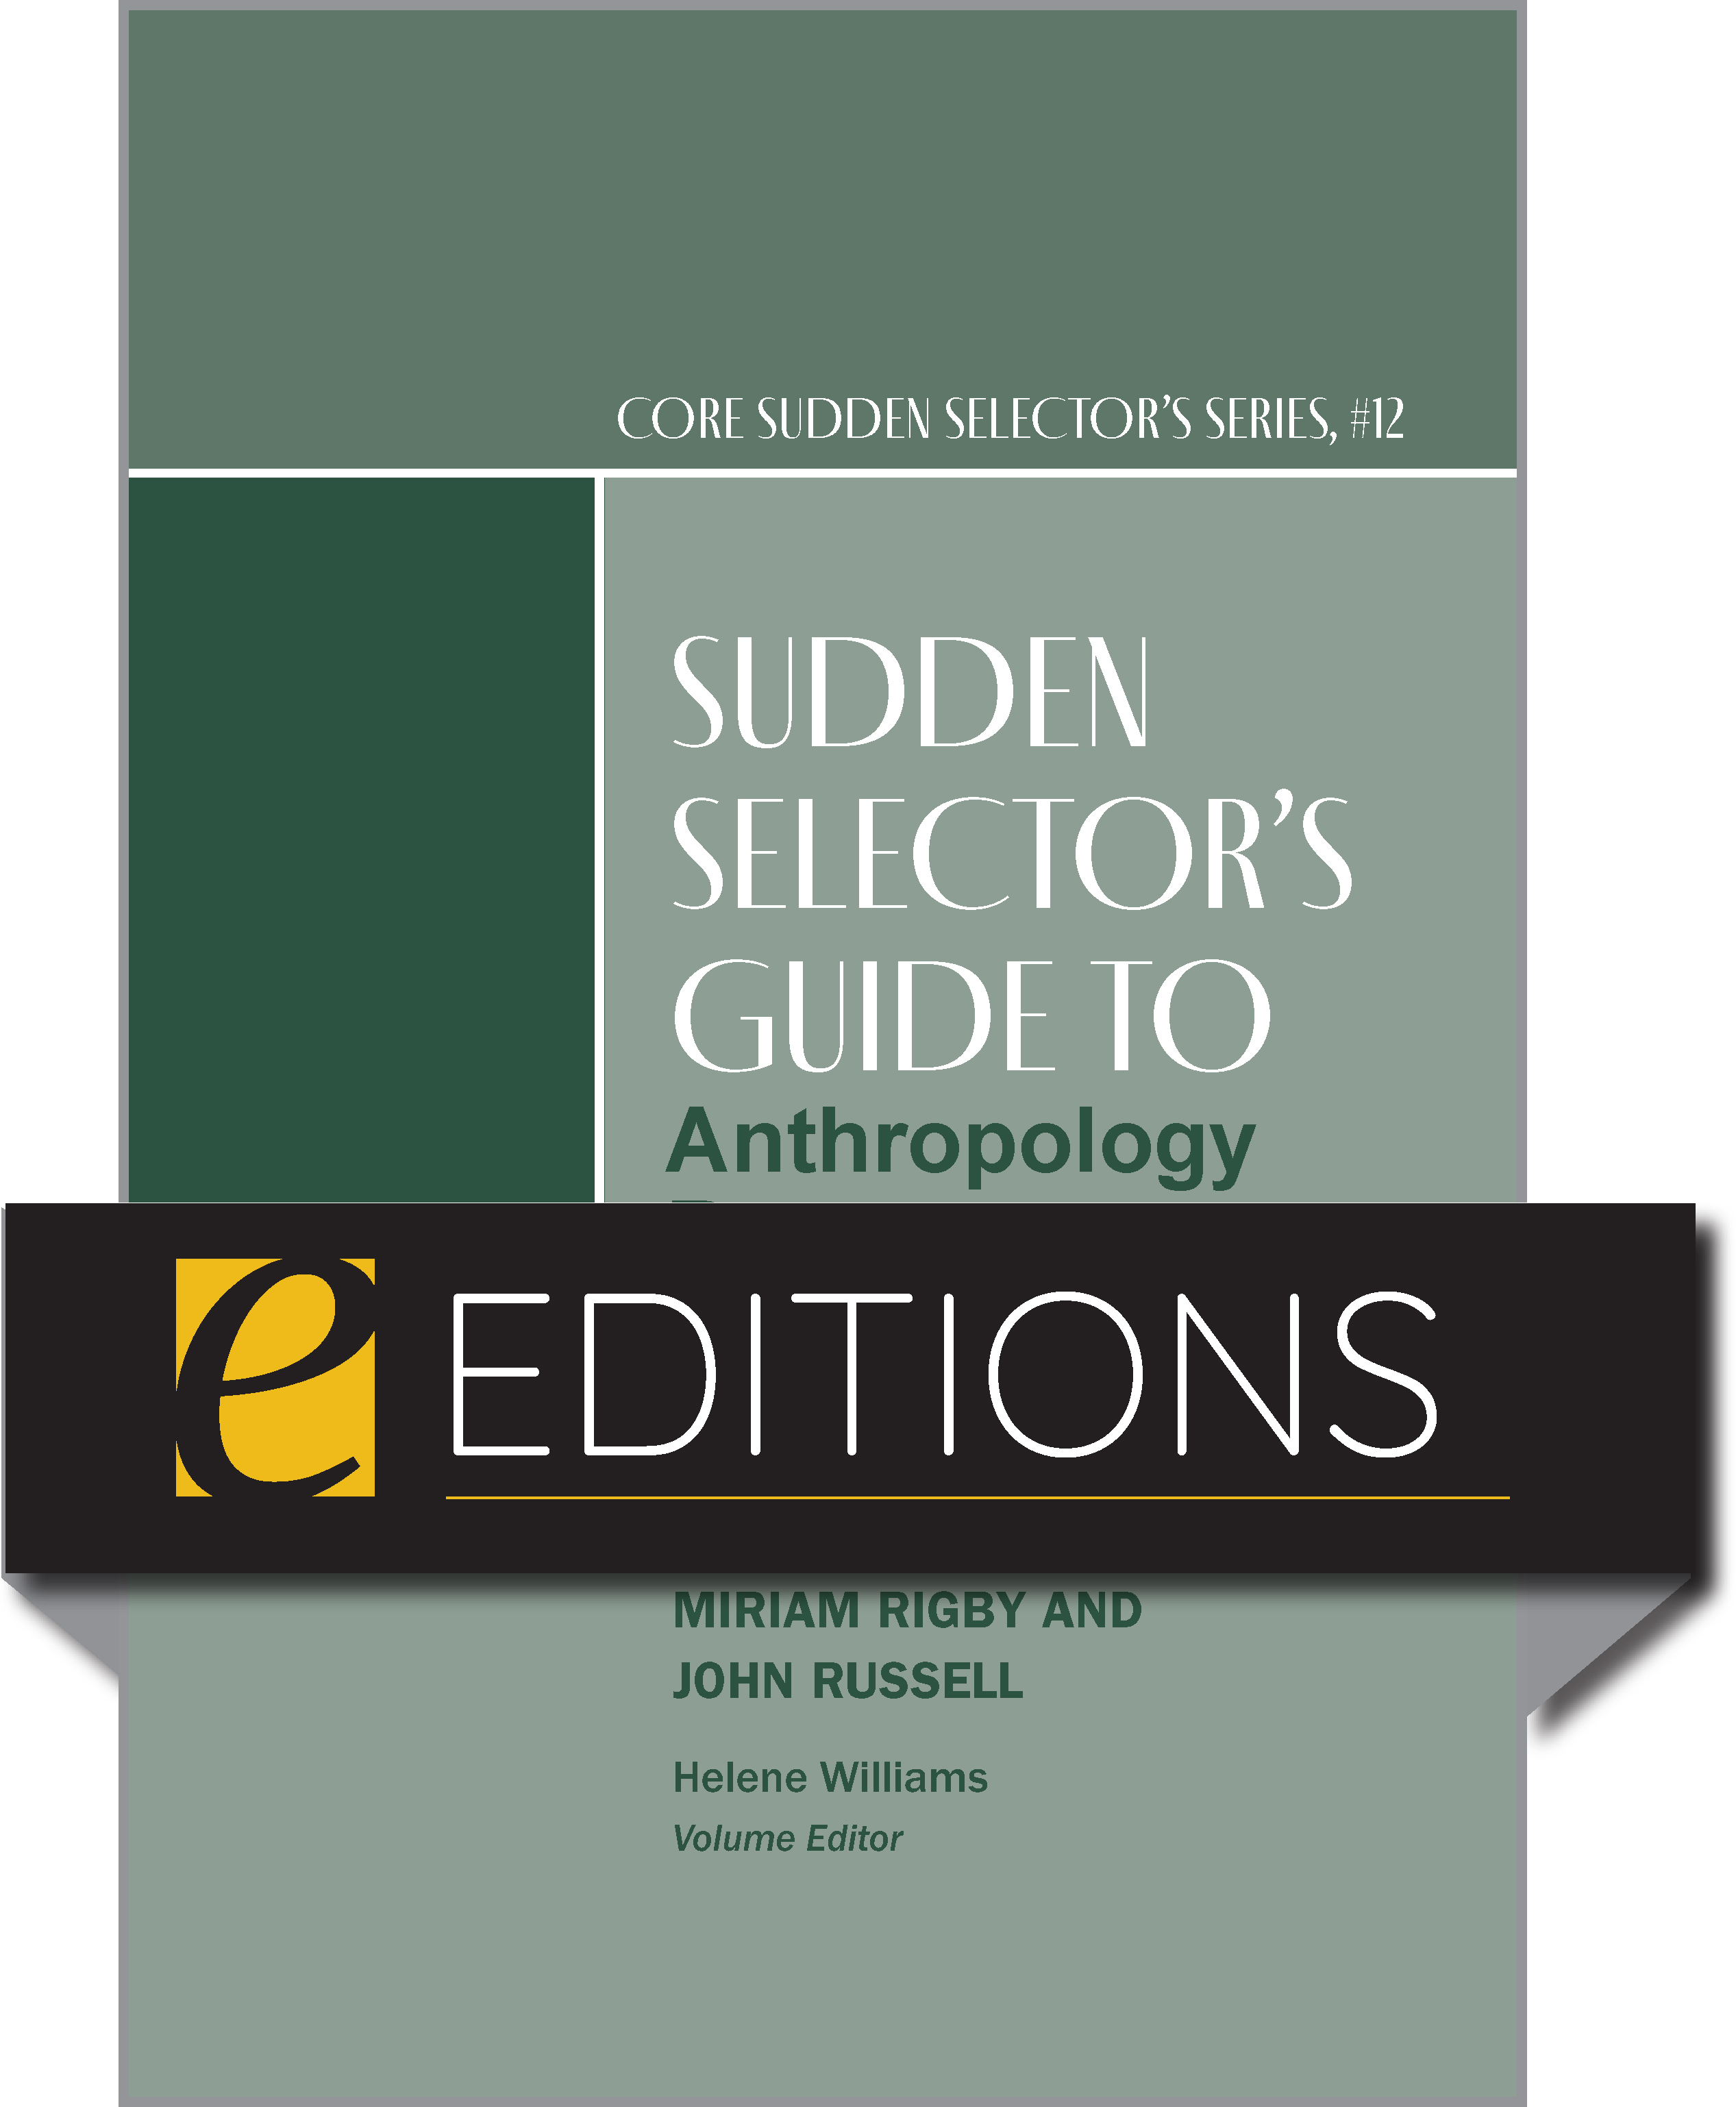 Image for Sudden Selector's Guide to Anthropology Resources—eEditions PDF e-book